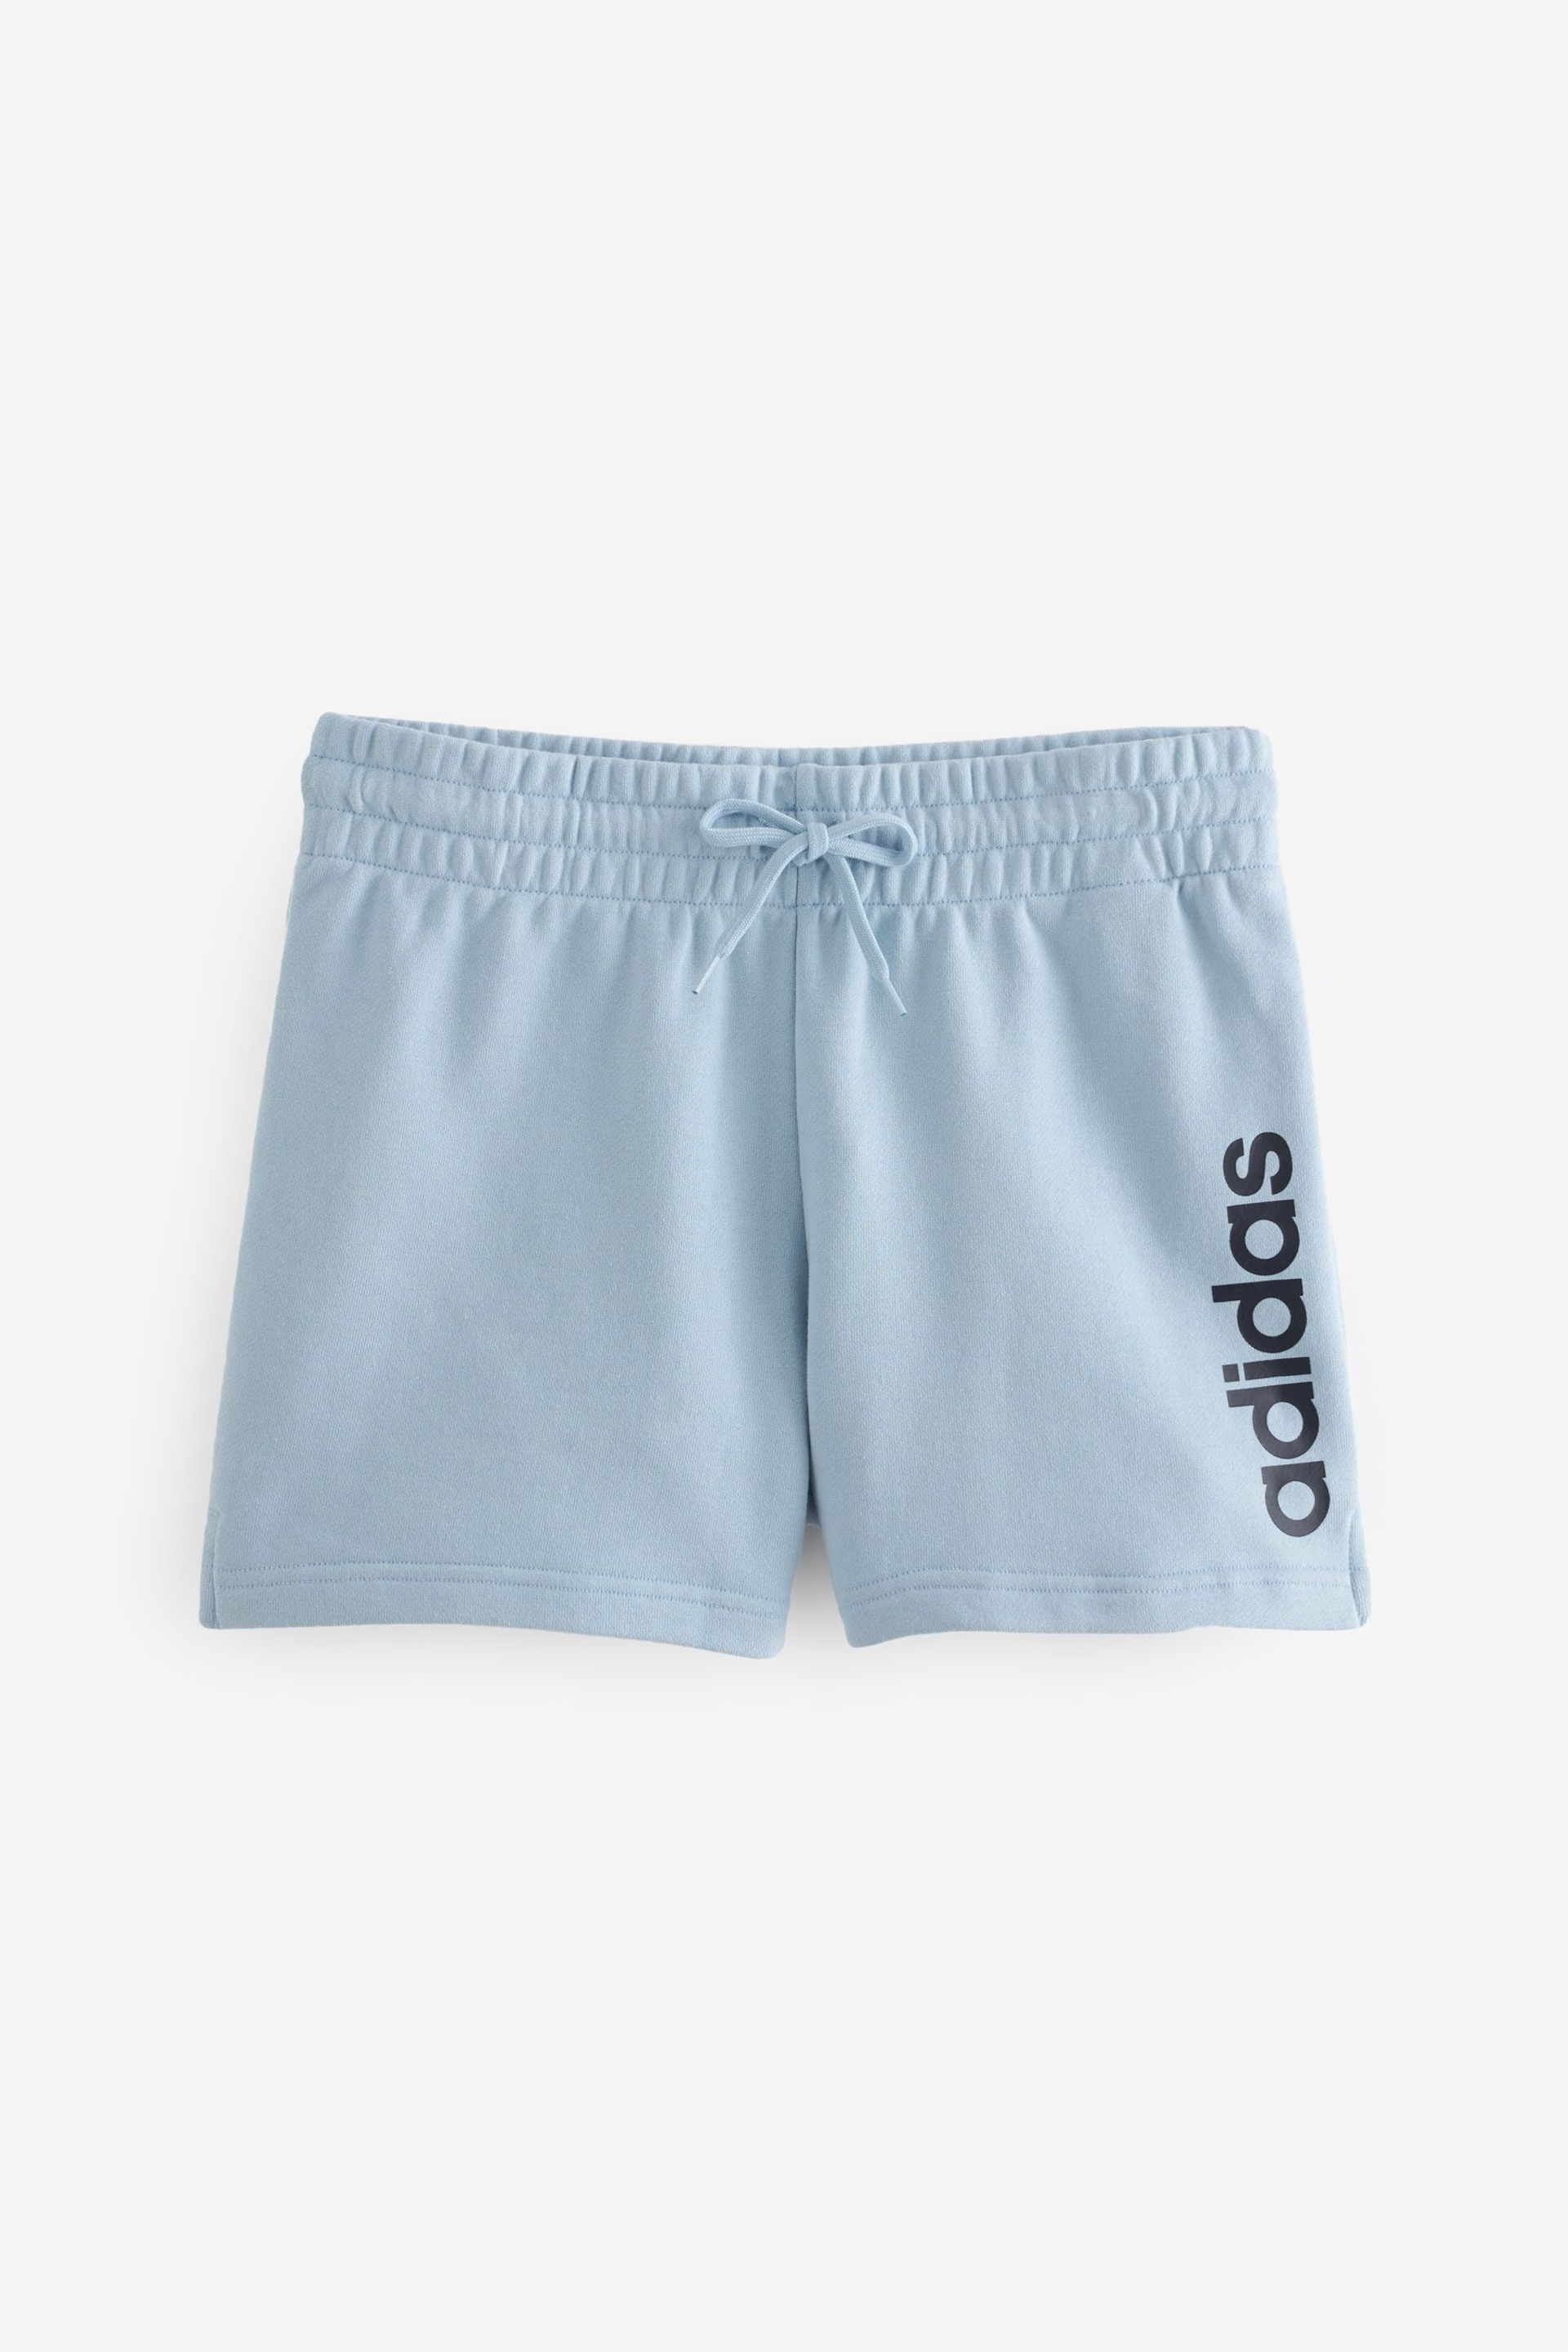 adidas Blue Sportswear Essentials Linear French Terry Shorts - Image 6 of 6